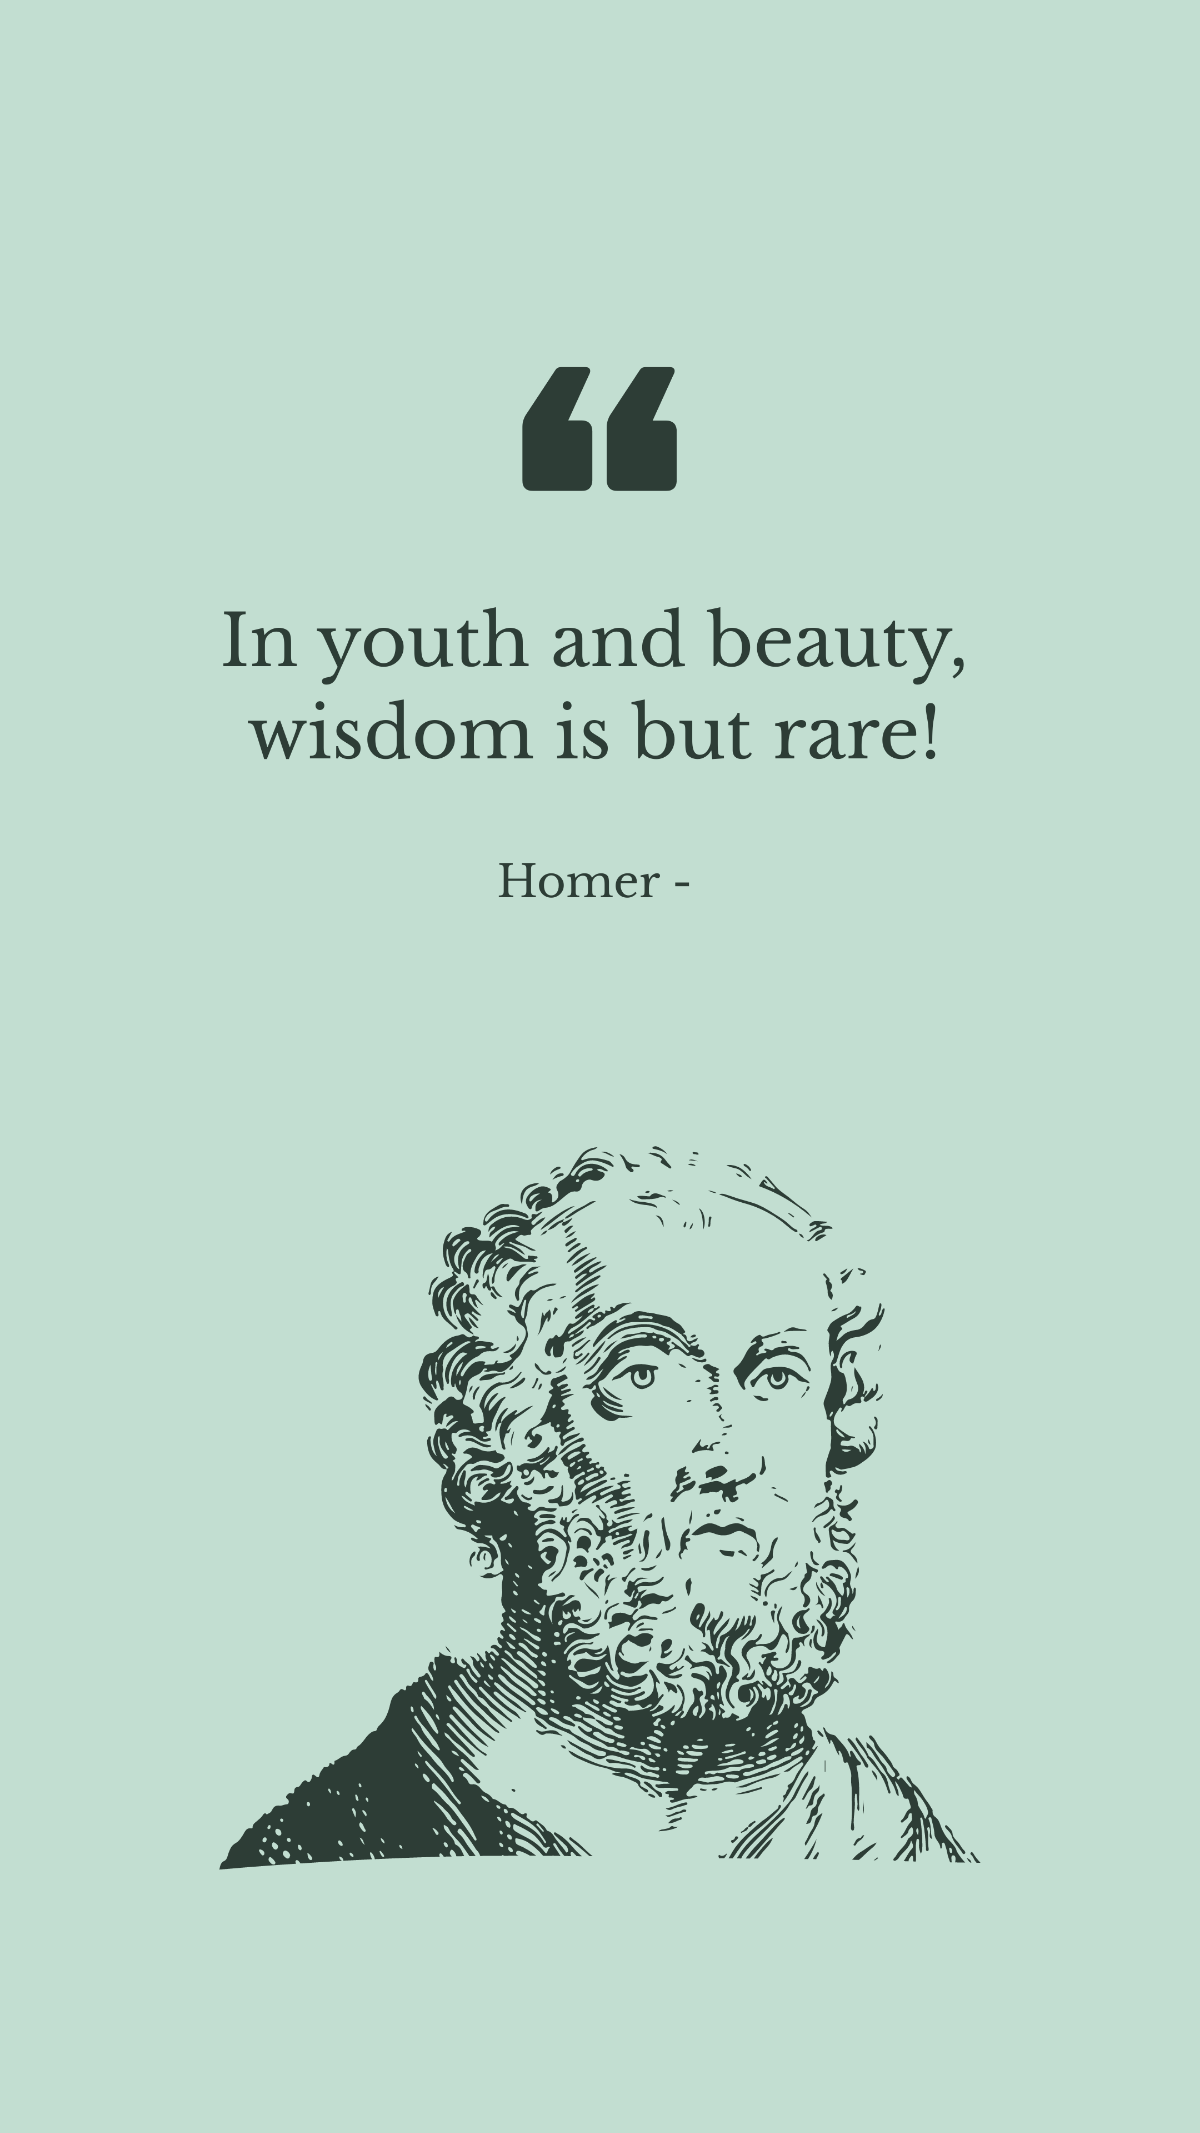 Homer - In youth and beauty, wisdom is but rare! Template